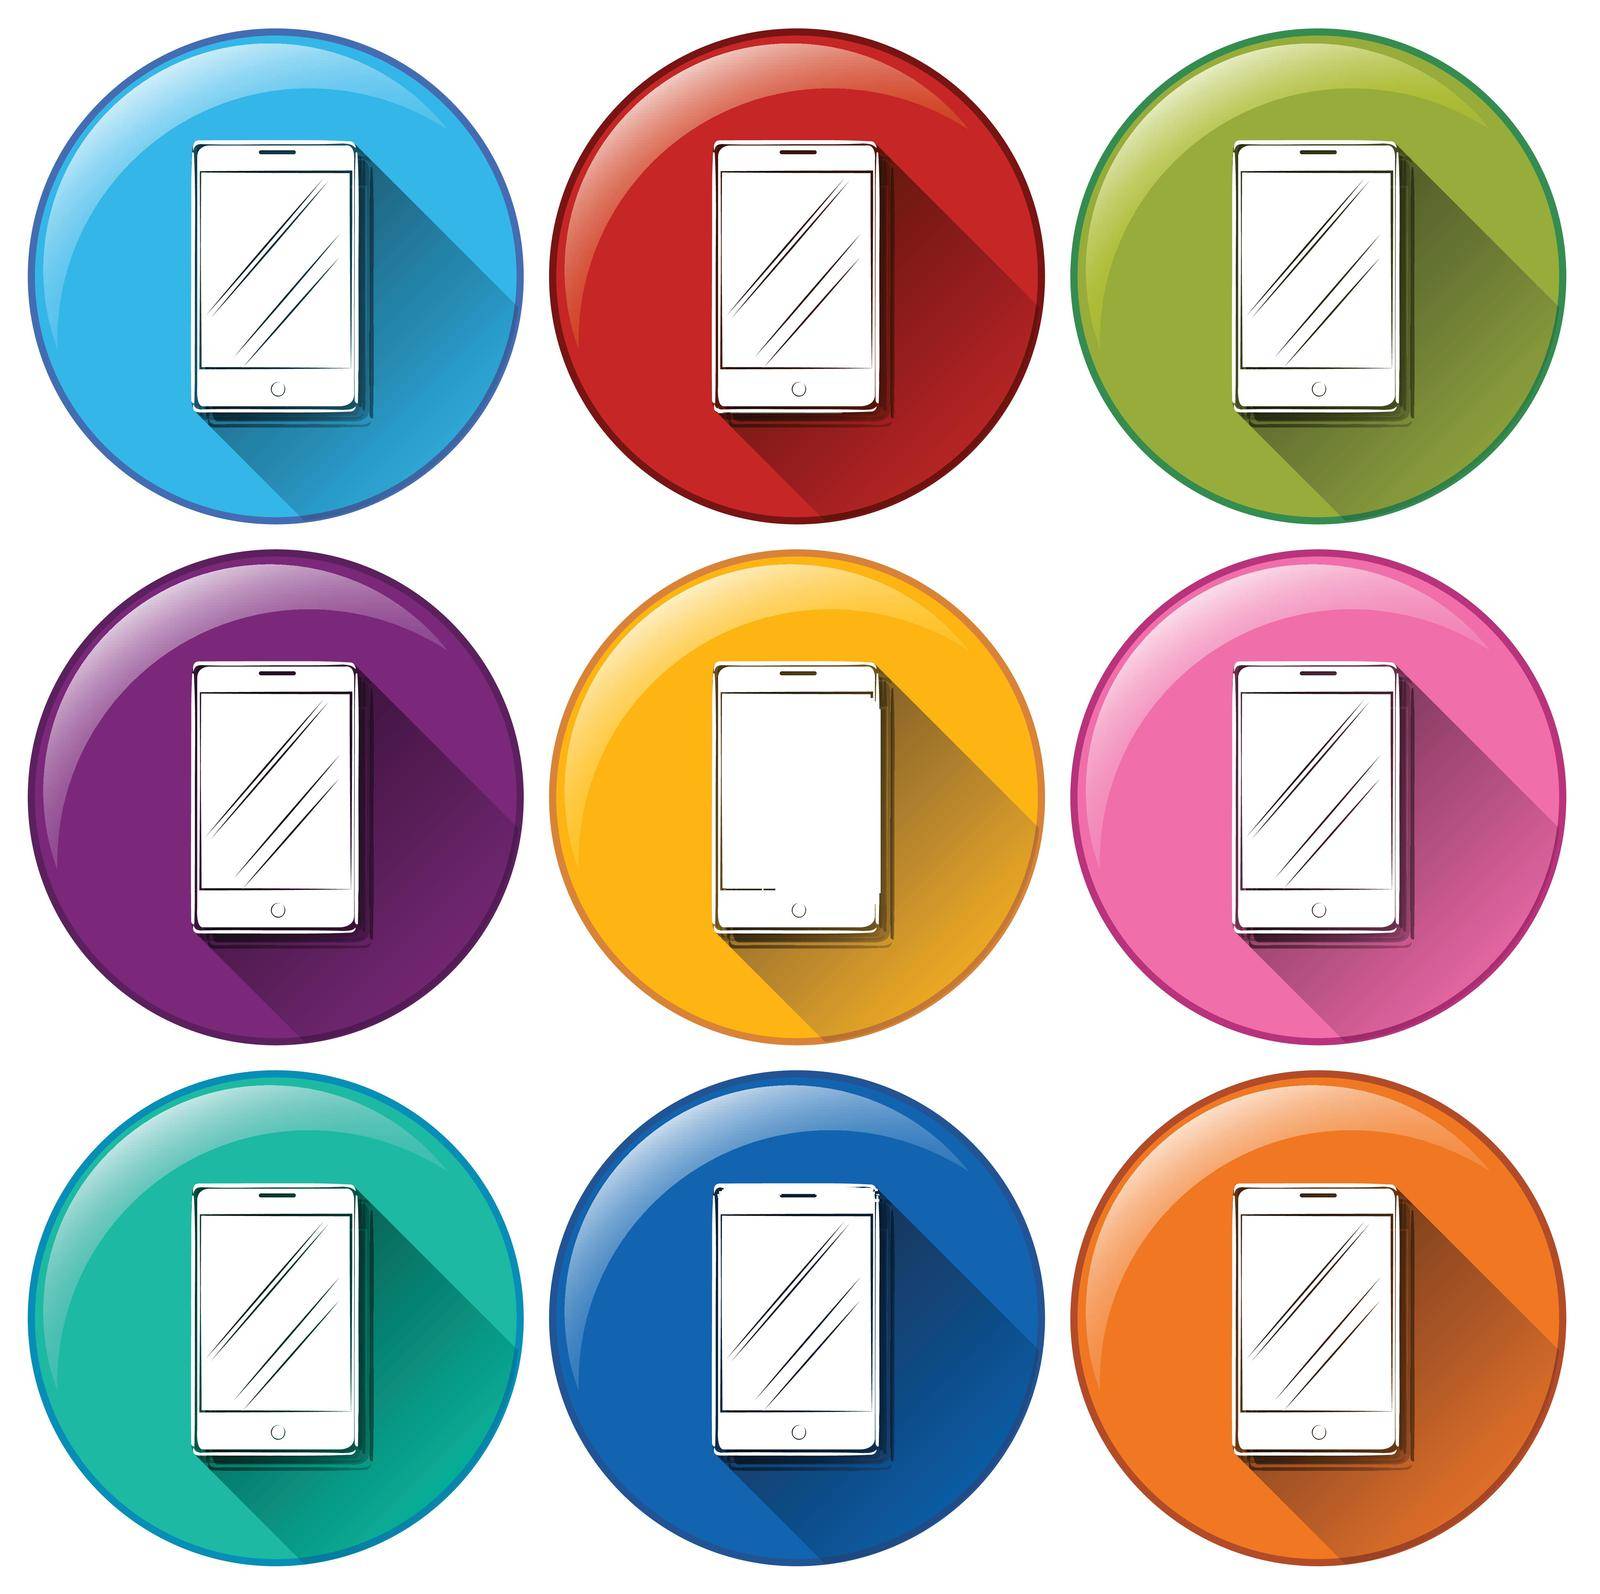 Illustration of the rounded icons with cellular phones on a white background